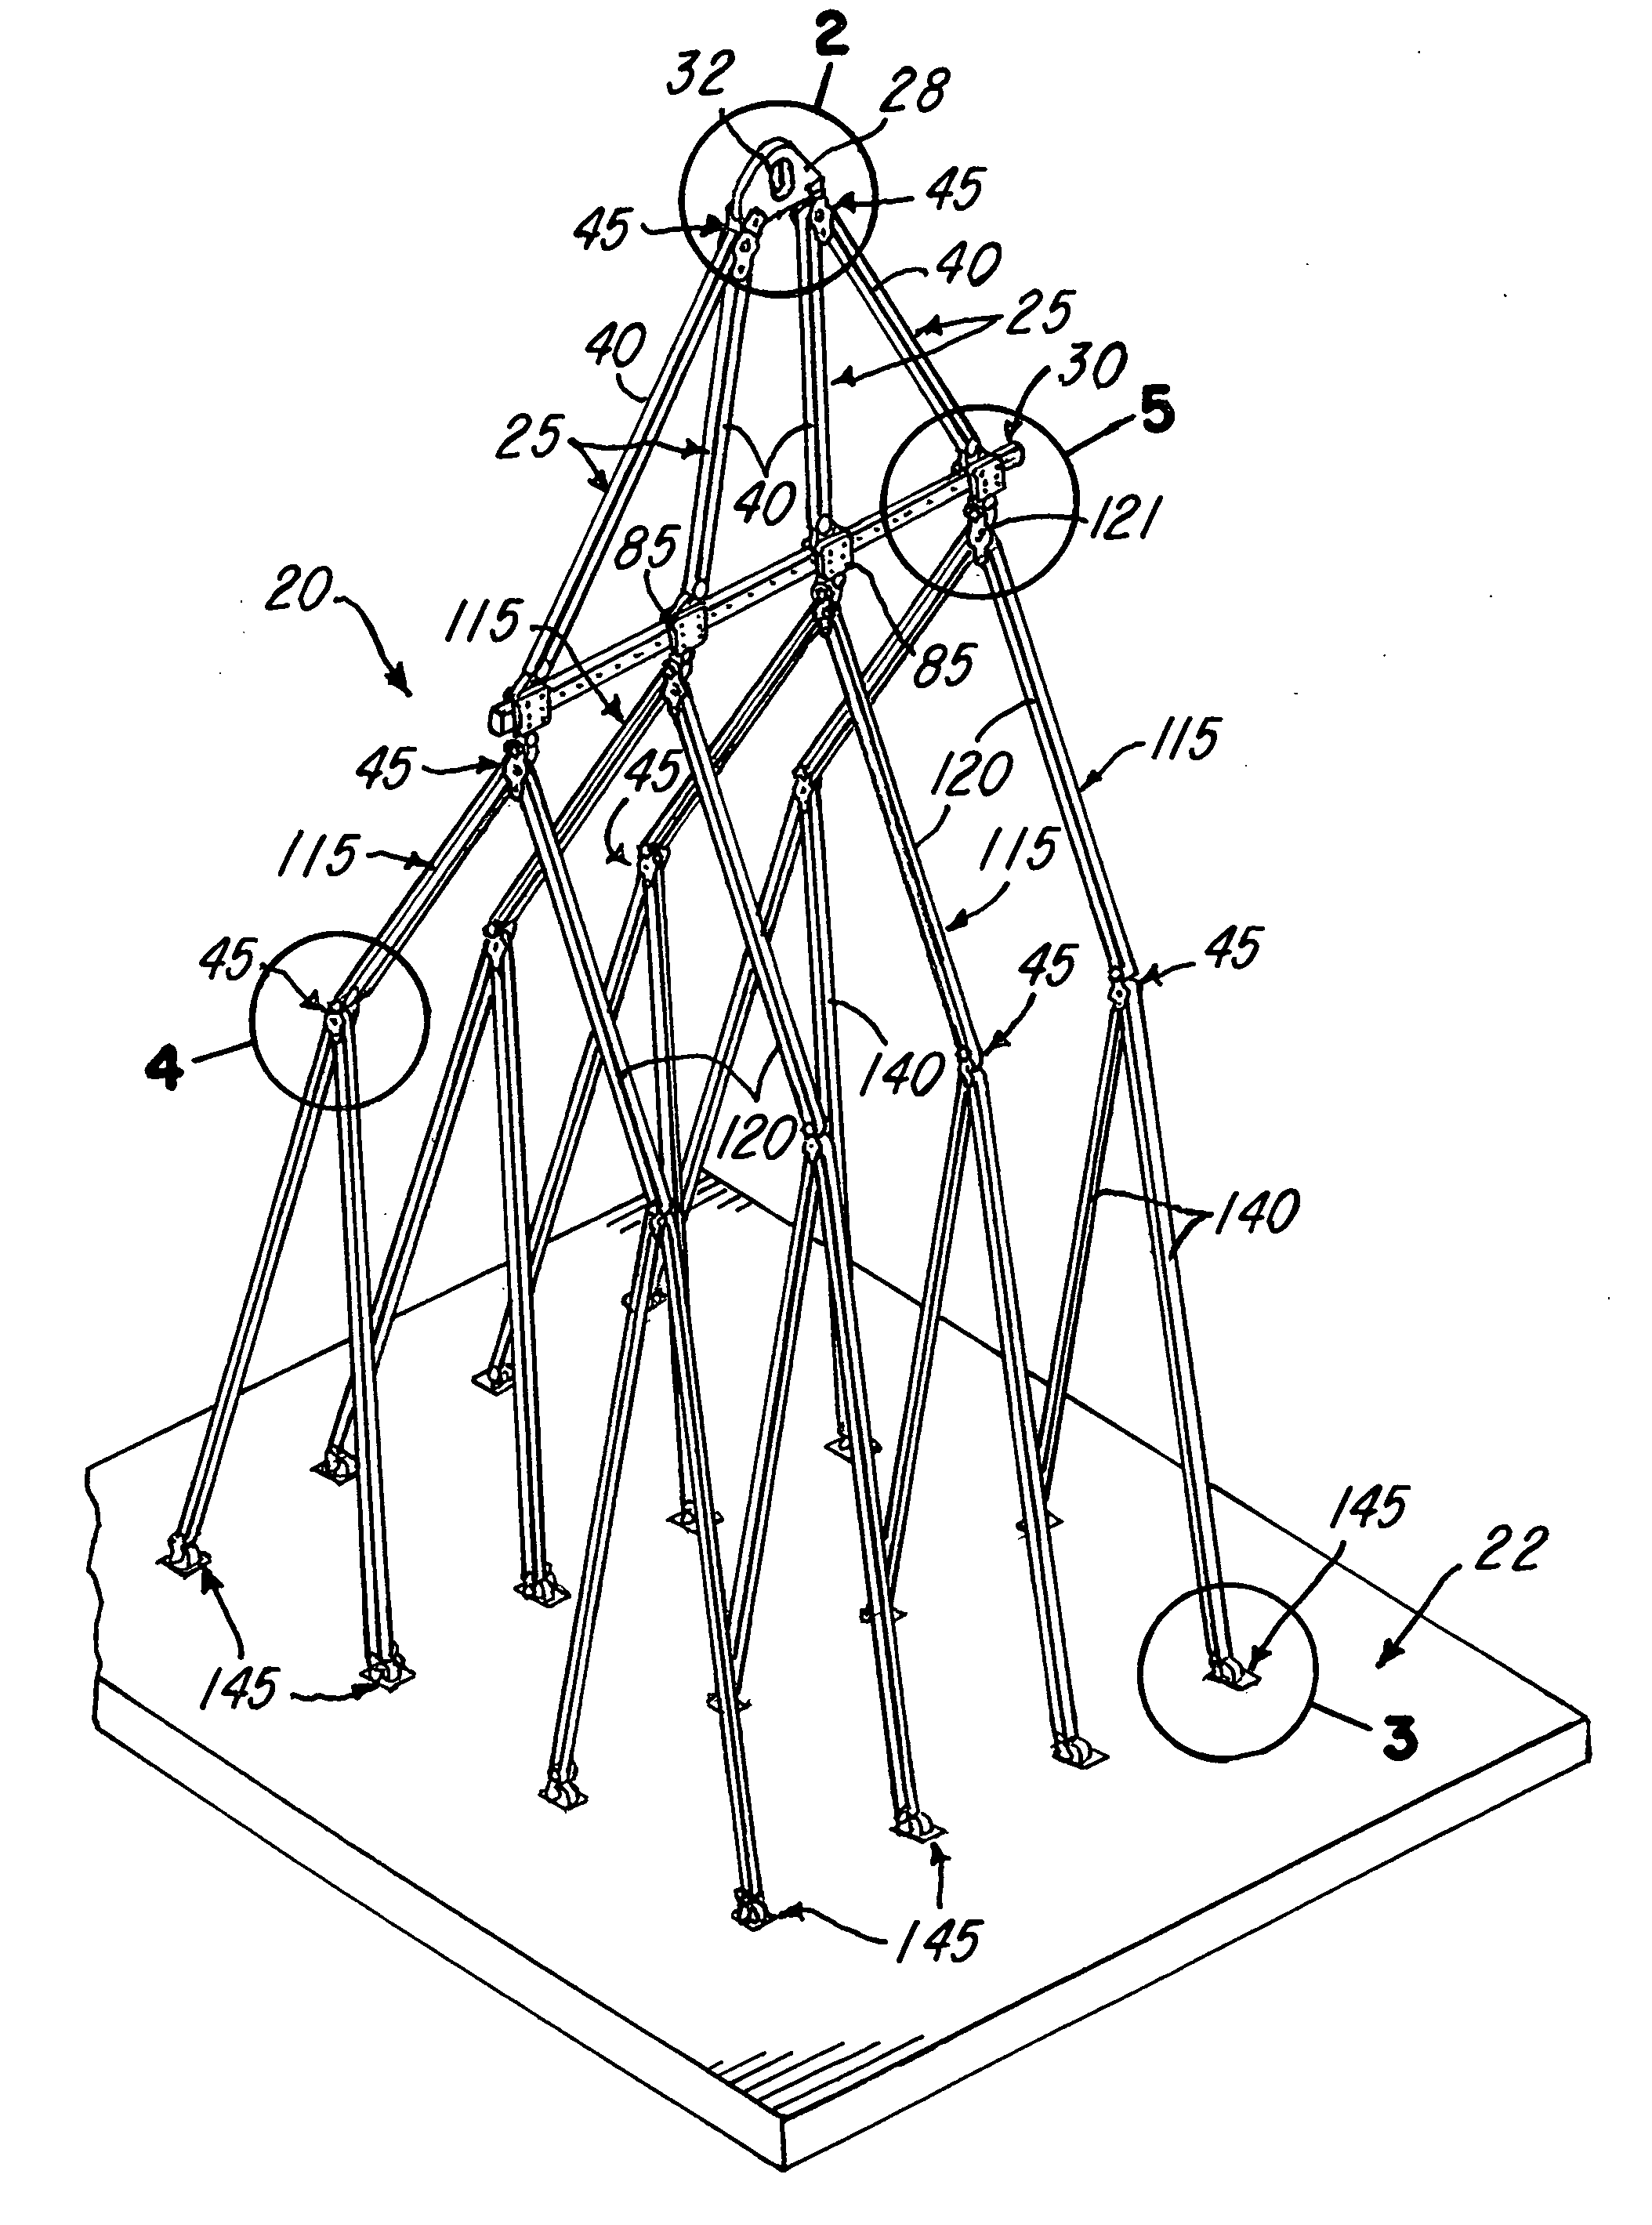 Synthetic fiber sling and roller system for carrying and positioning a load